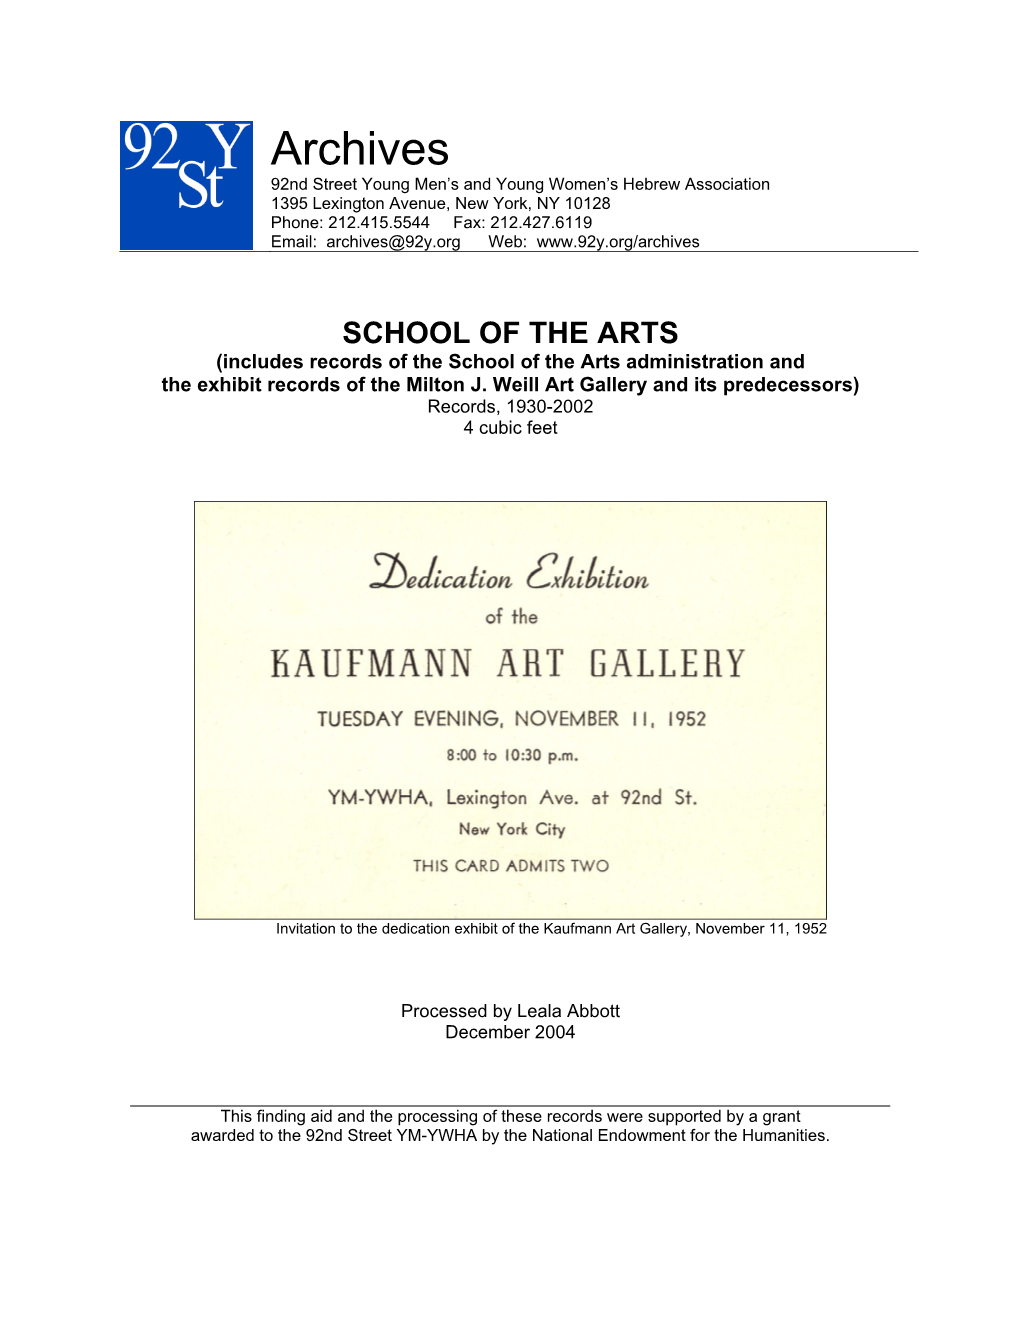 SCHOOL of the ARTS (Includes Records of the School of the Arts Administration and the Exhibit Records of the Milton J